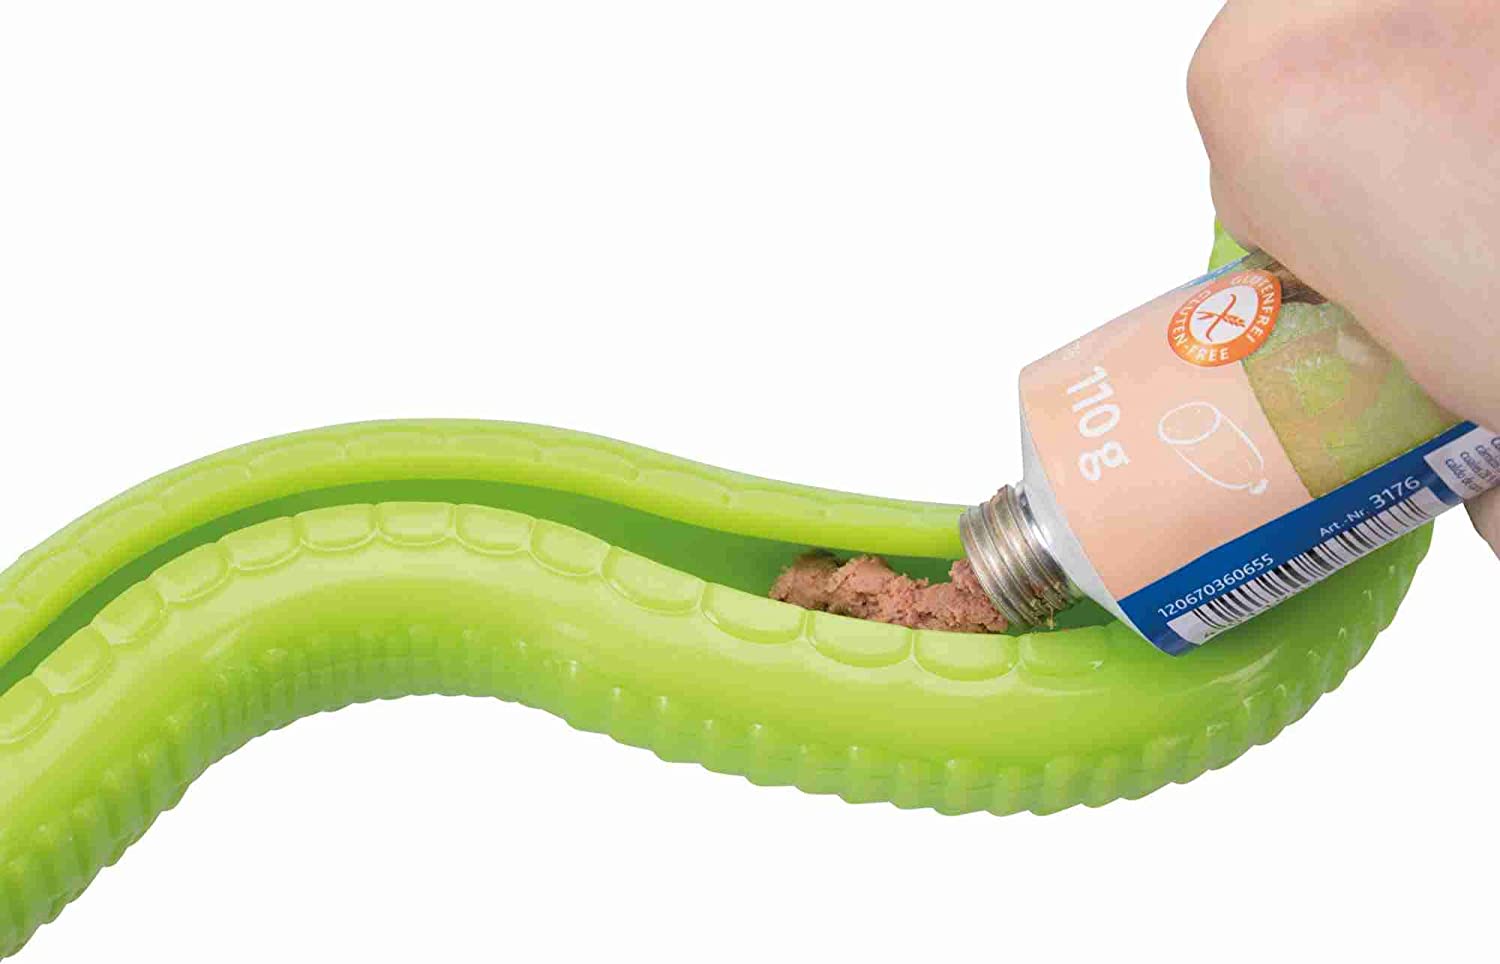 Trixie Snack Snake Thermoplastic Rubber Dog Toy